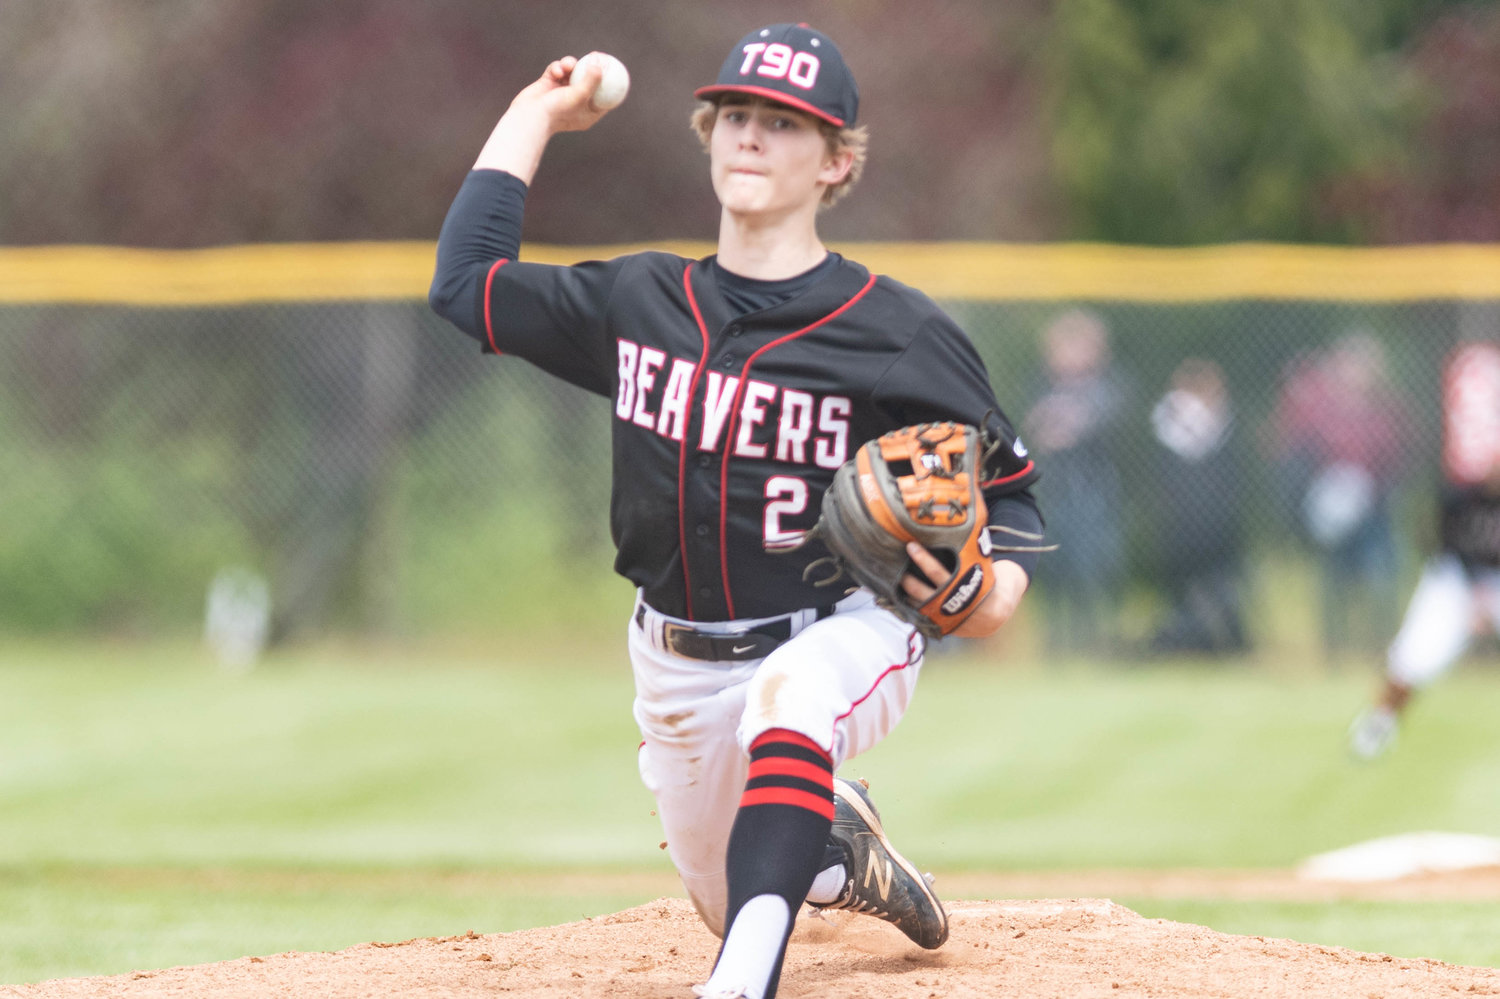 Tenino's Cody Strawn threw 4 2/3 hitless innings to help the Beavers beat Eatonville in the district playoffs on May 13.